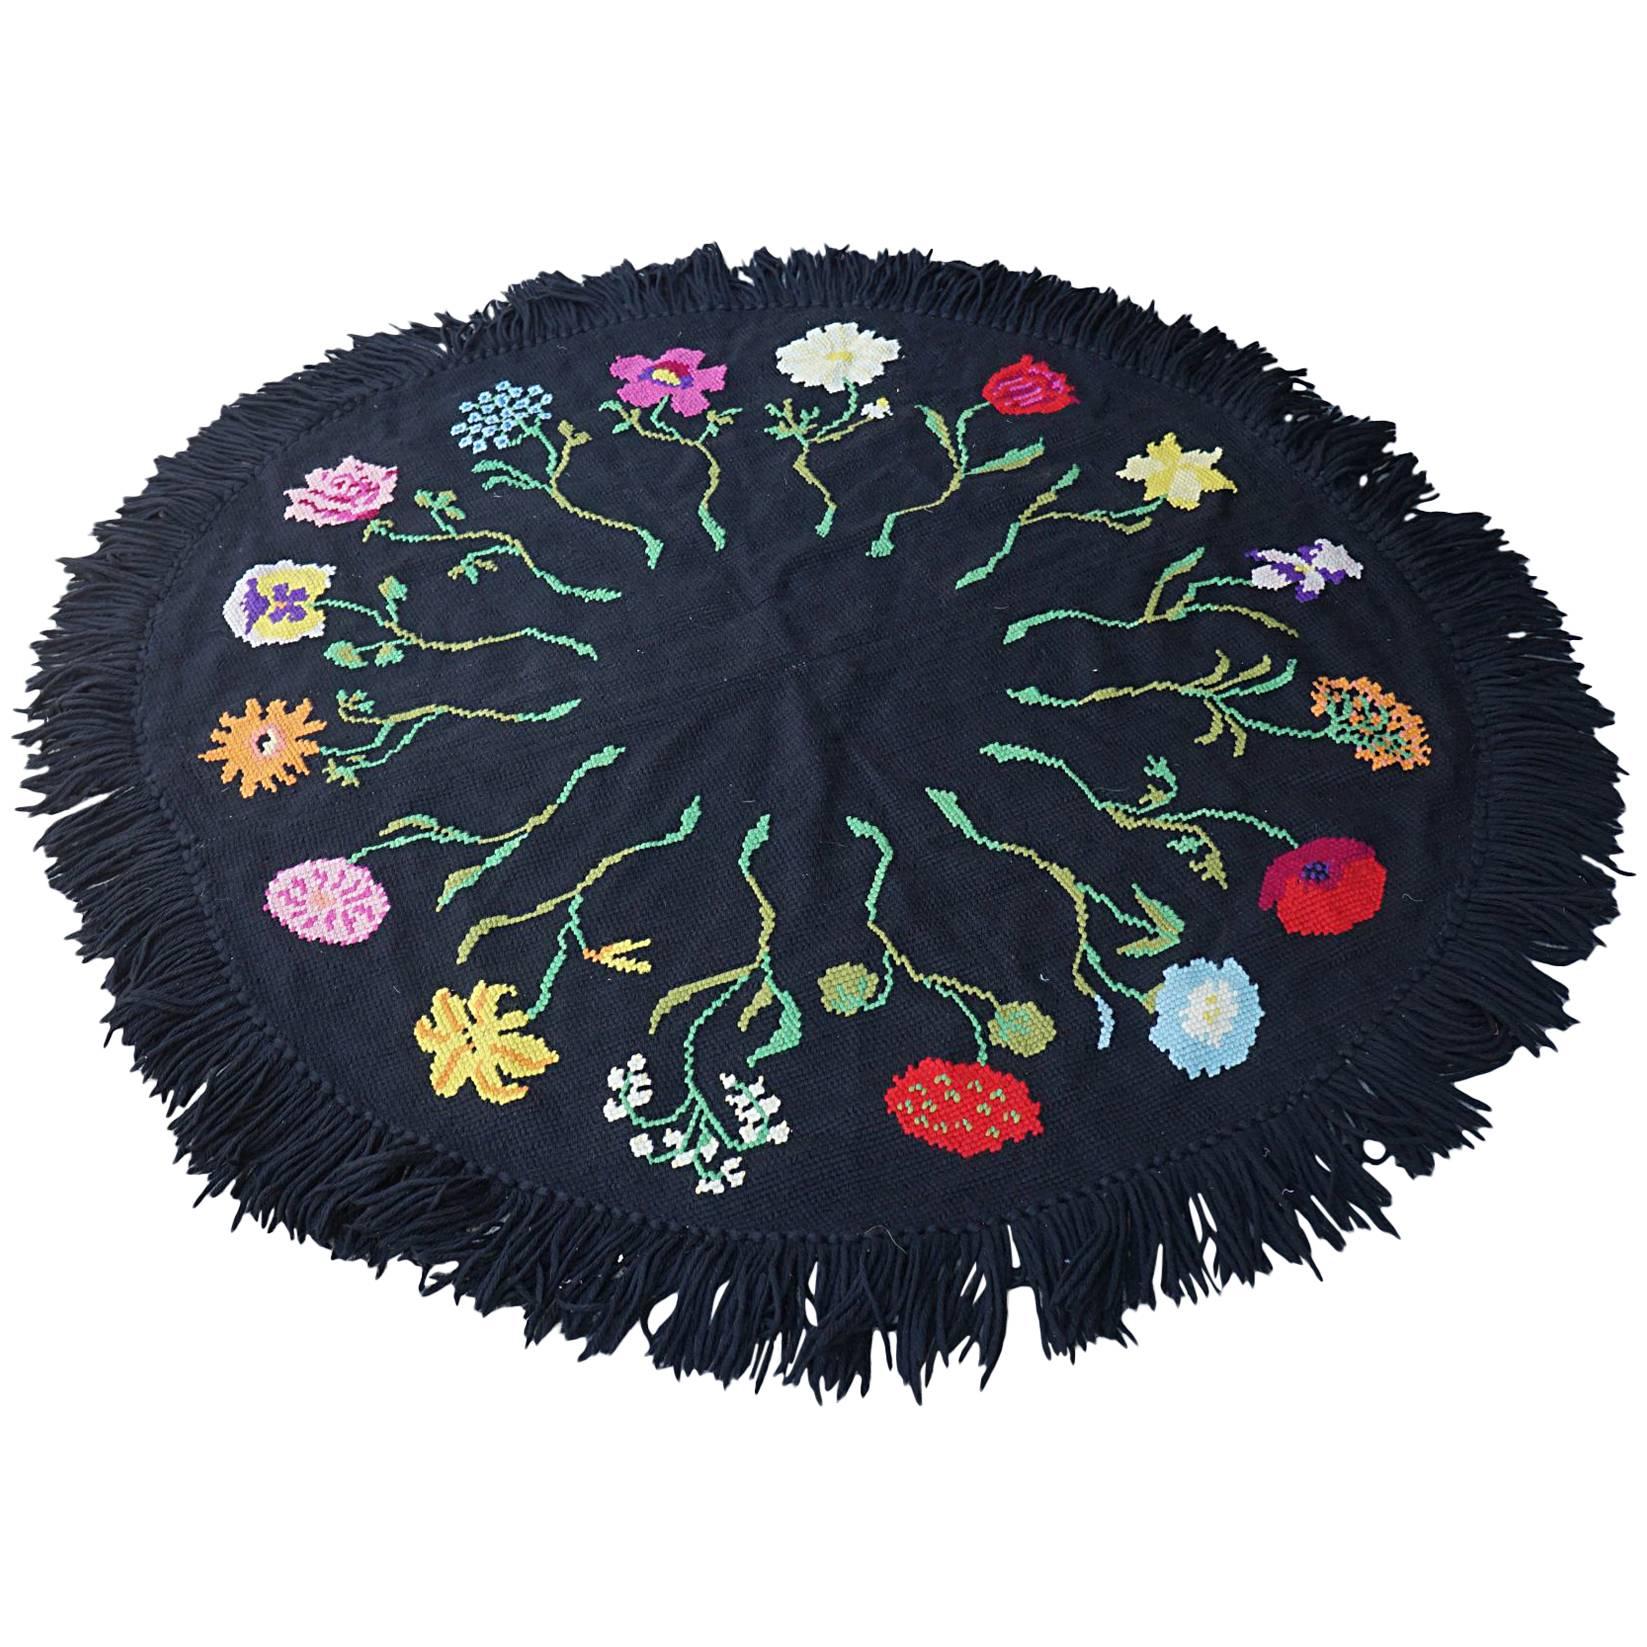 Vintage Hooked Yarn Rug from the Estate of Bunny Mellon